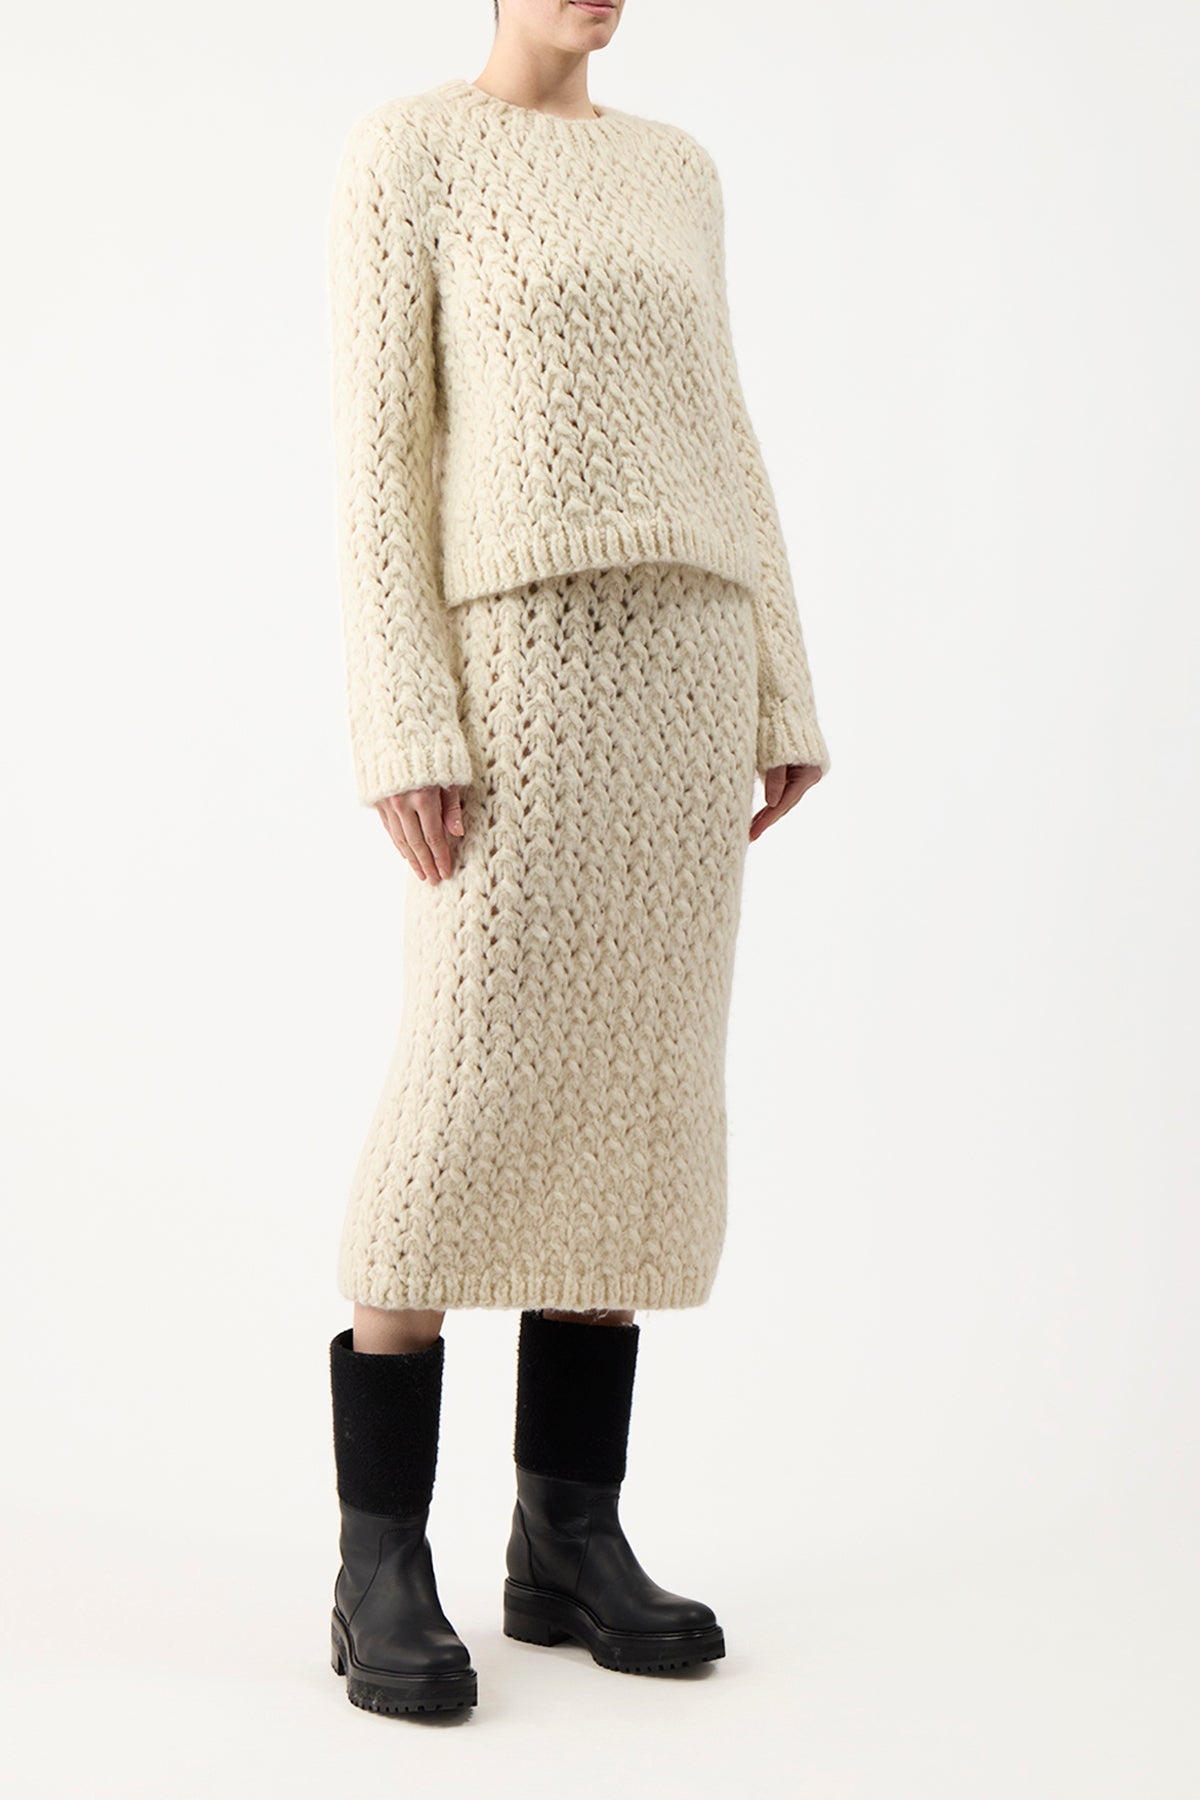 Collin Skirt in Ivory Welfat Cashmere - 3